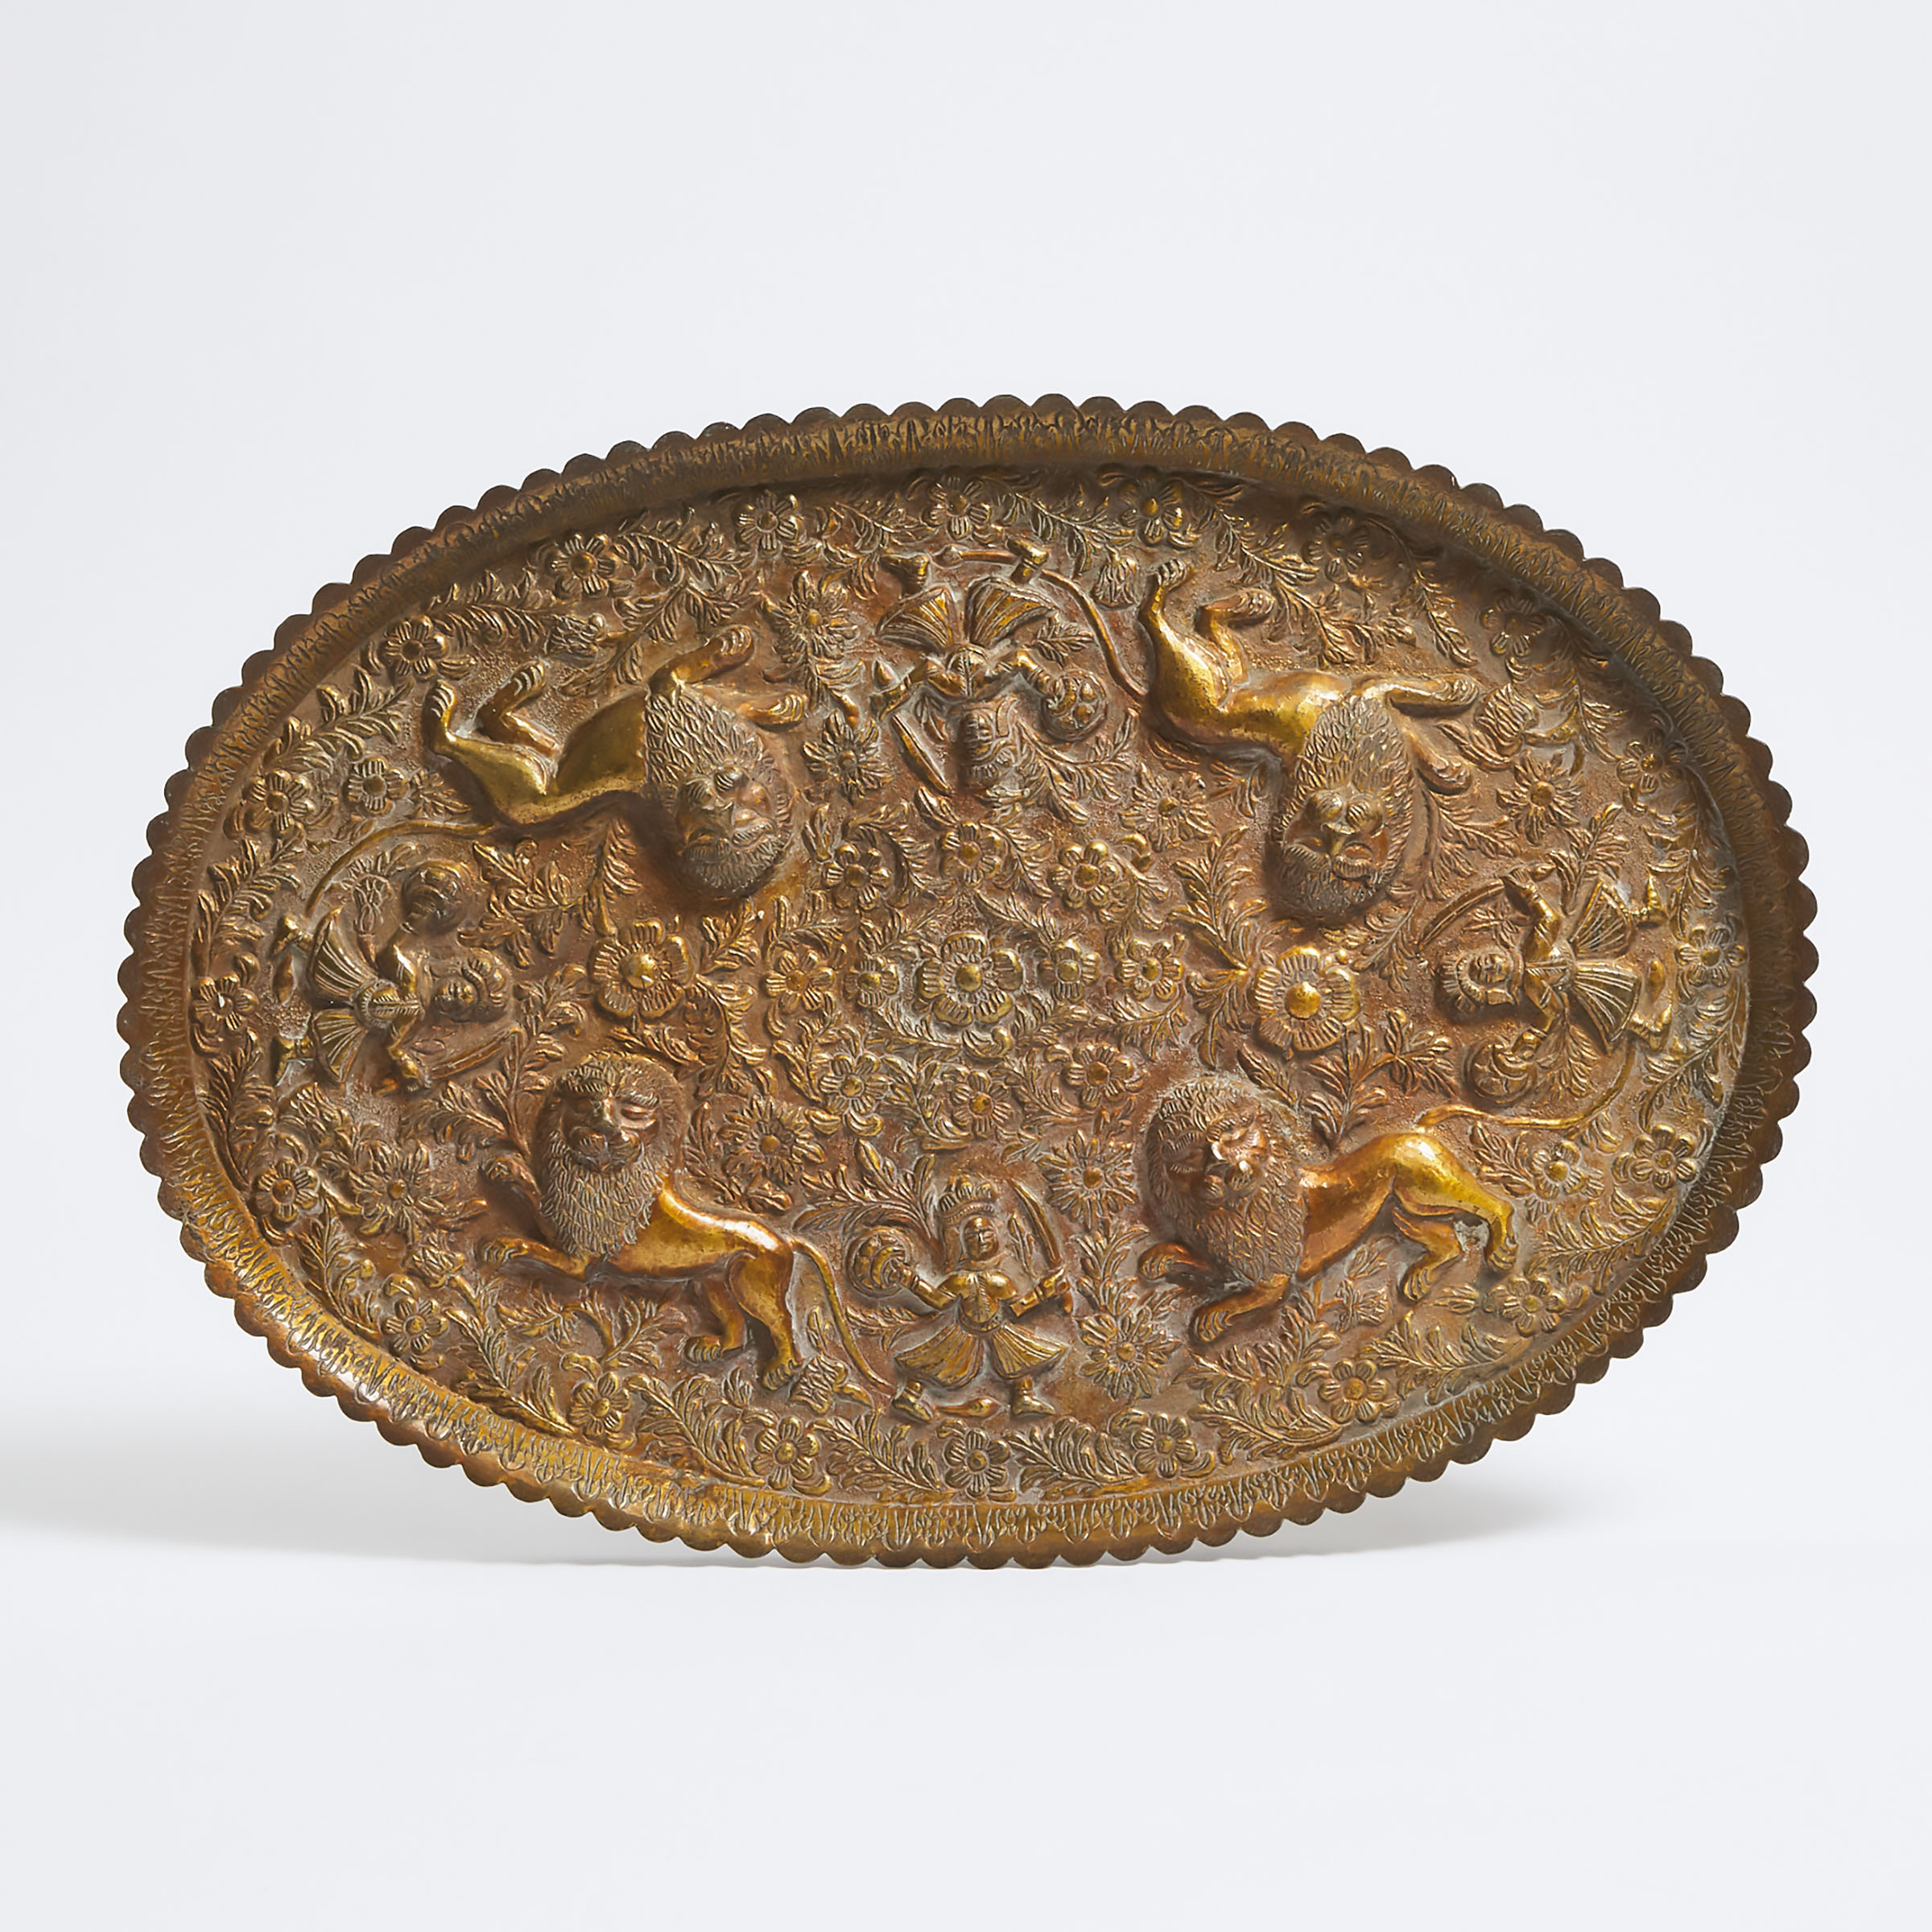 A Large Gilt Bronze Oval Platter, Rajasthan, 18th Century